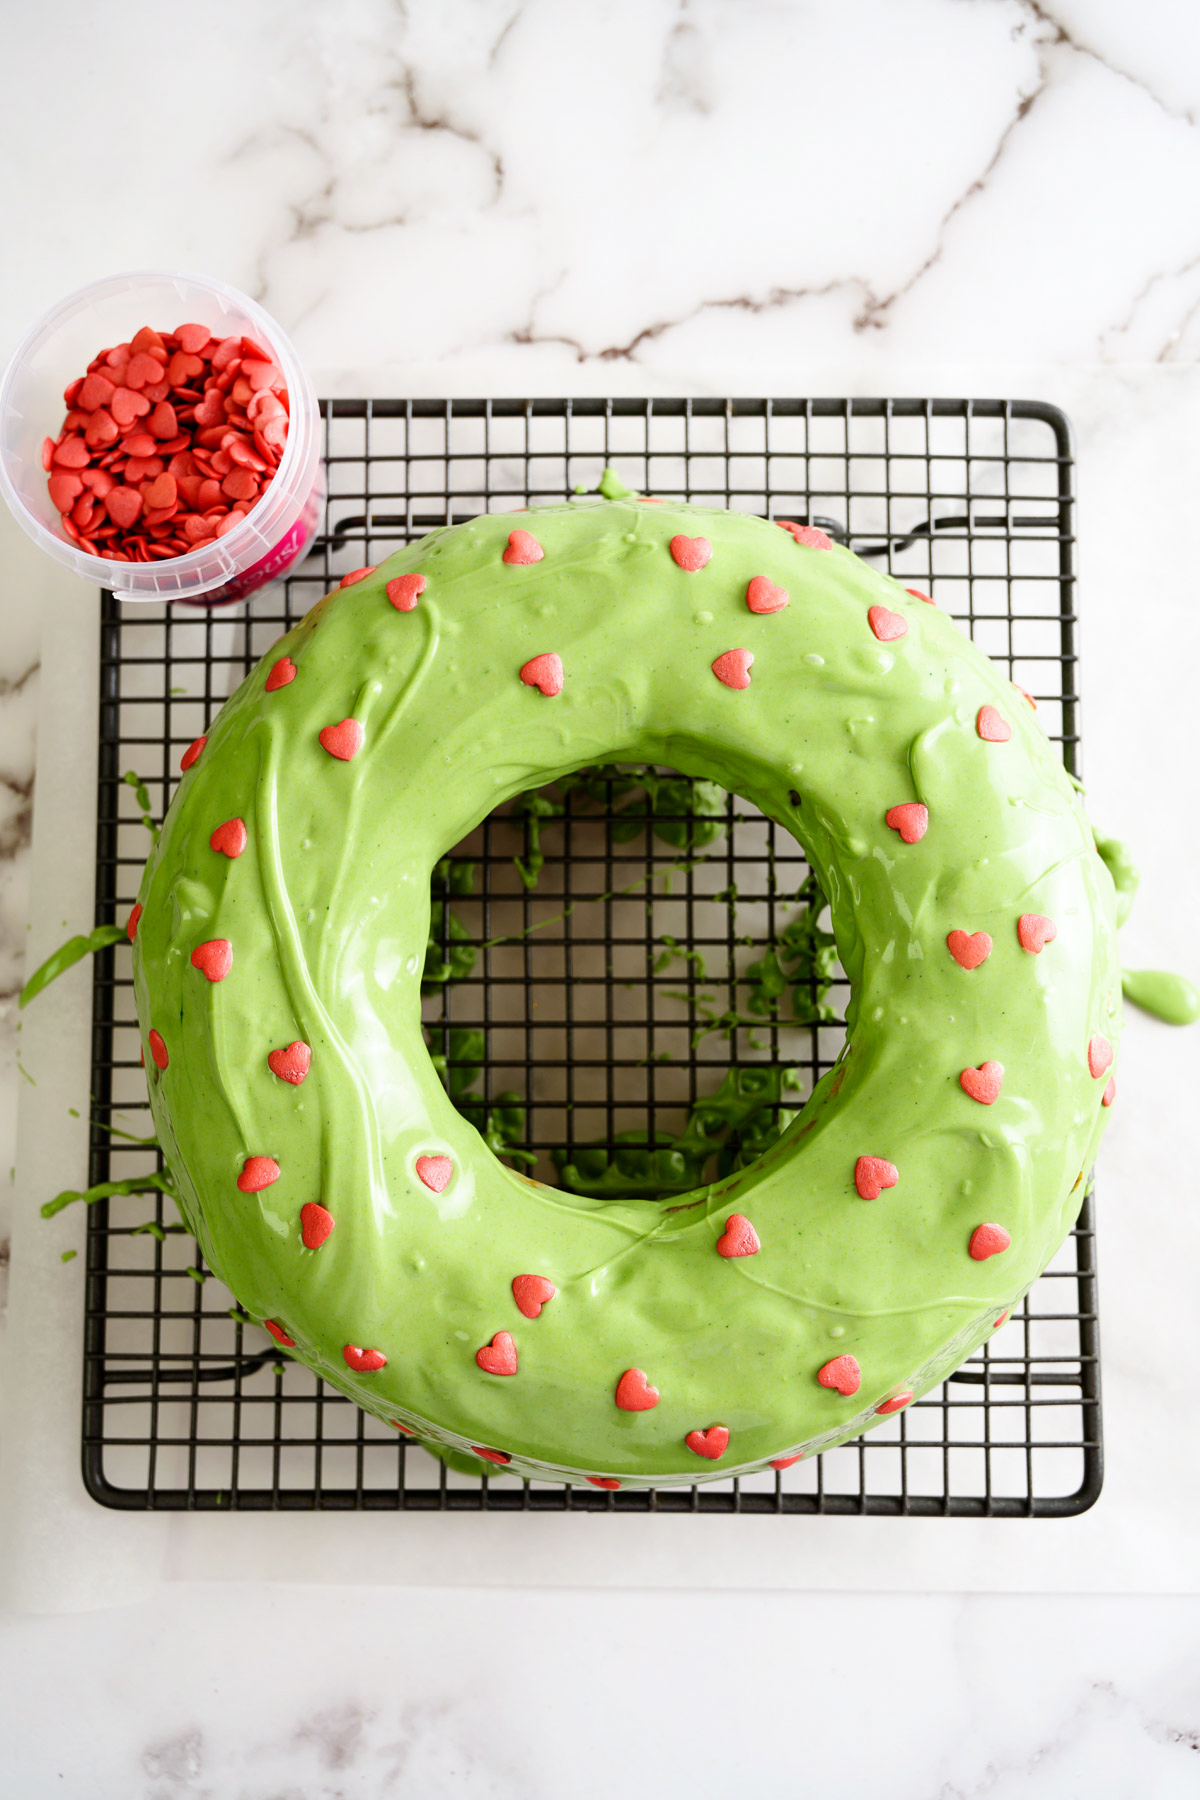 A round cake made from a banana cake recipe, coated in green icing and decorated with heart sprinkles.